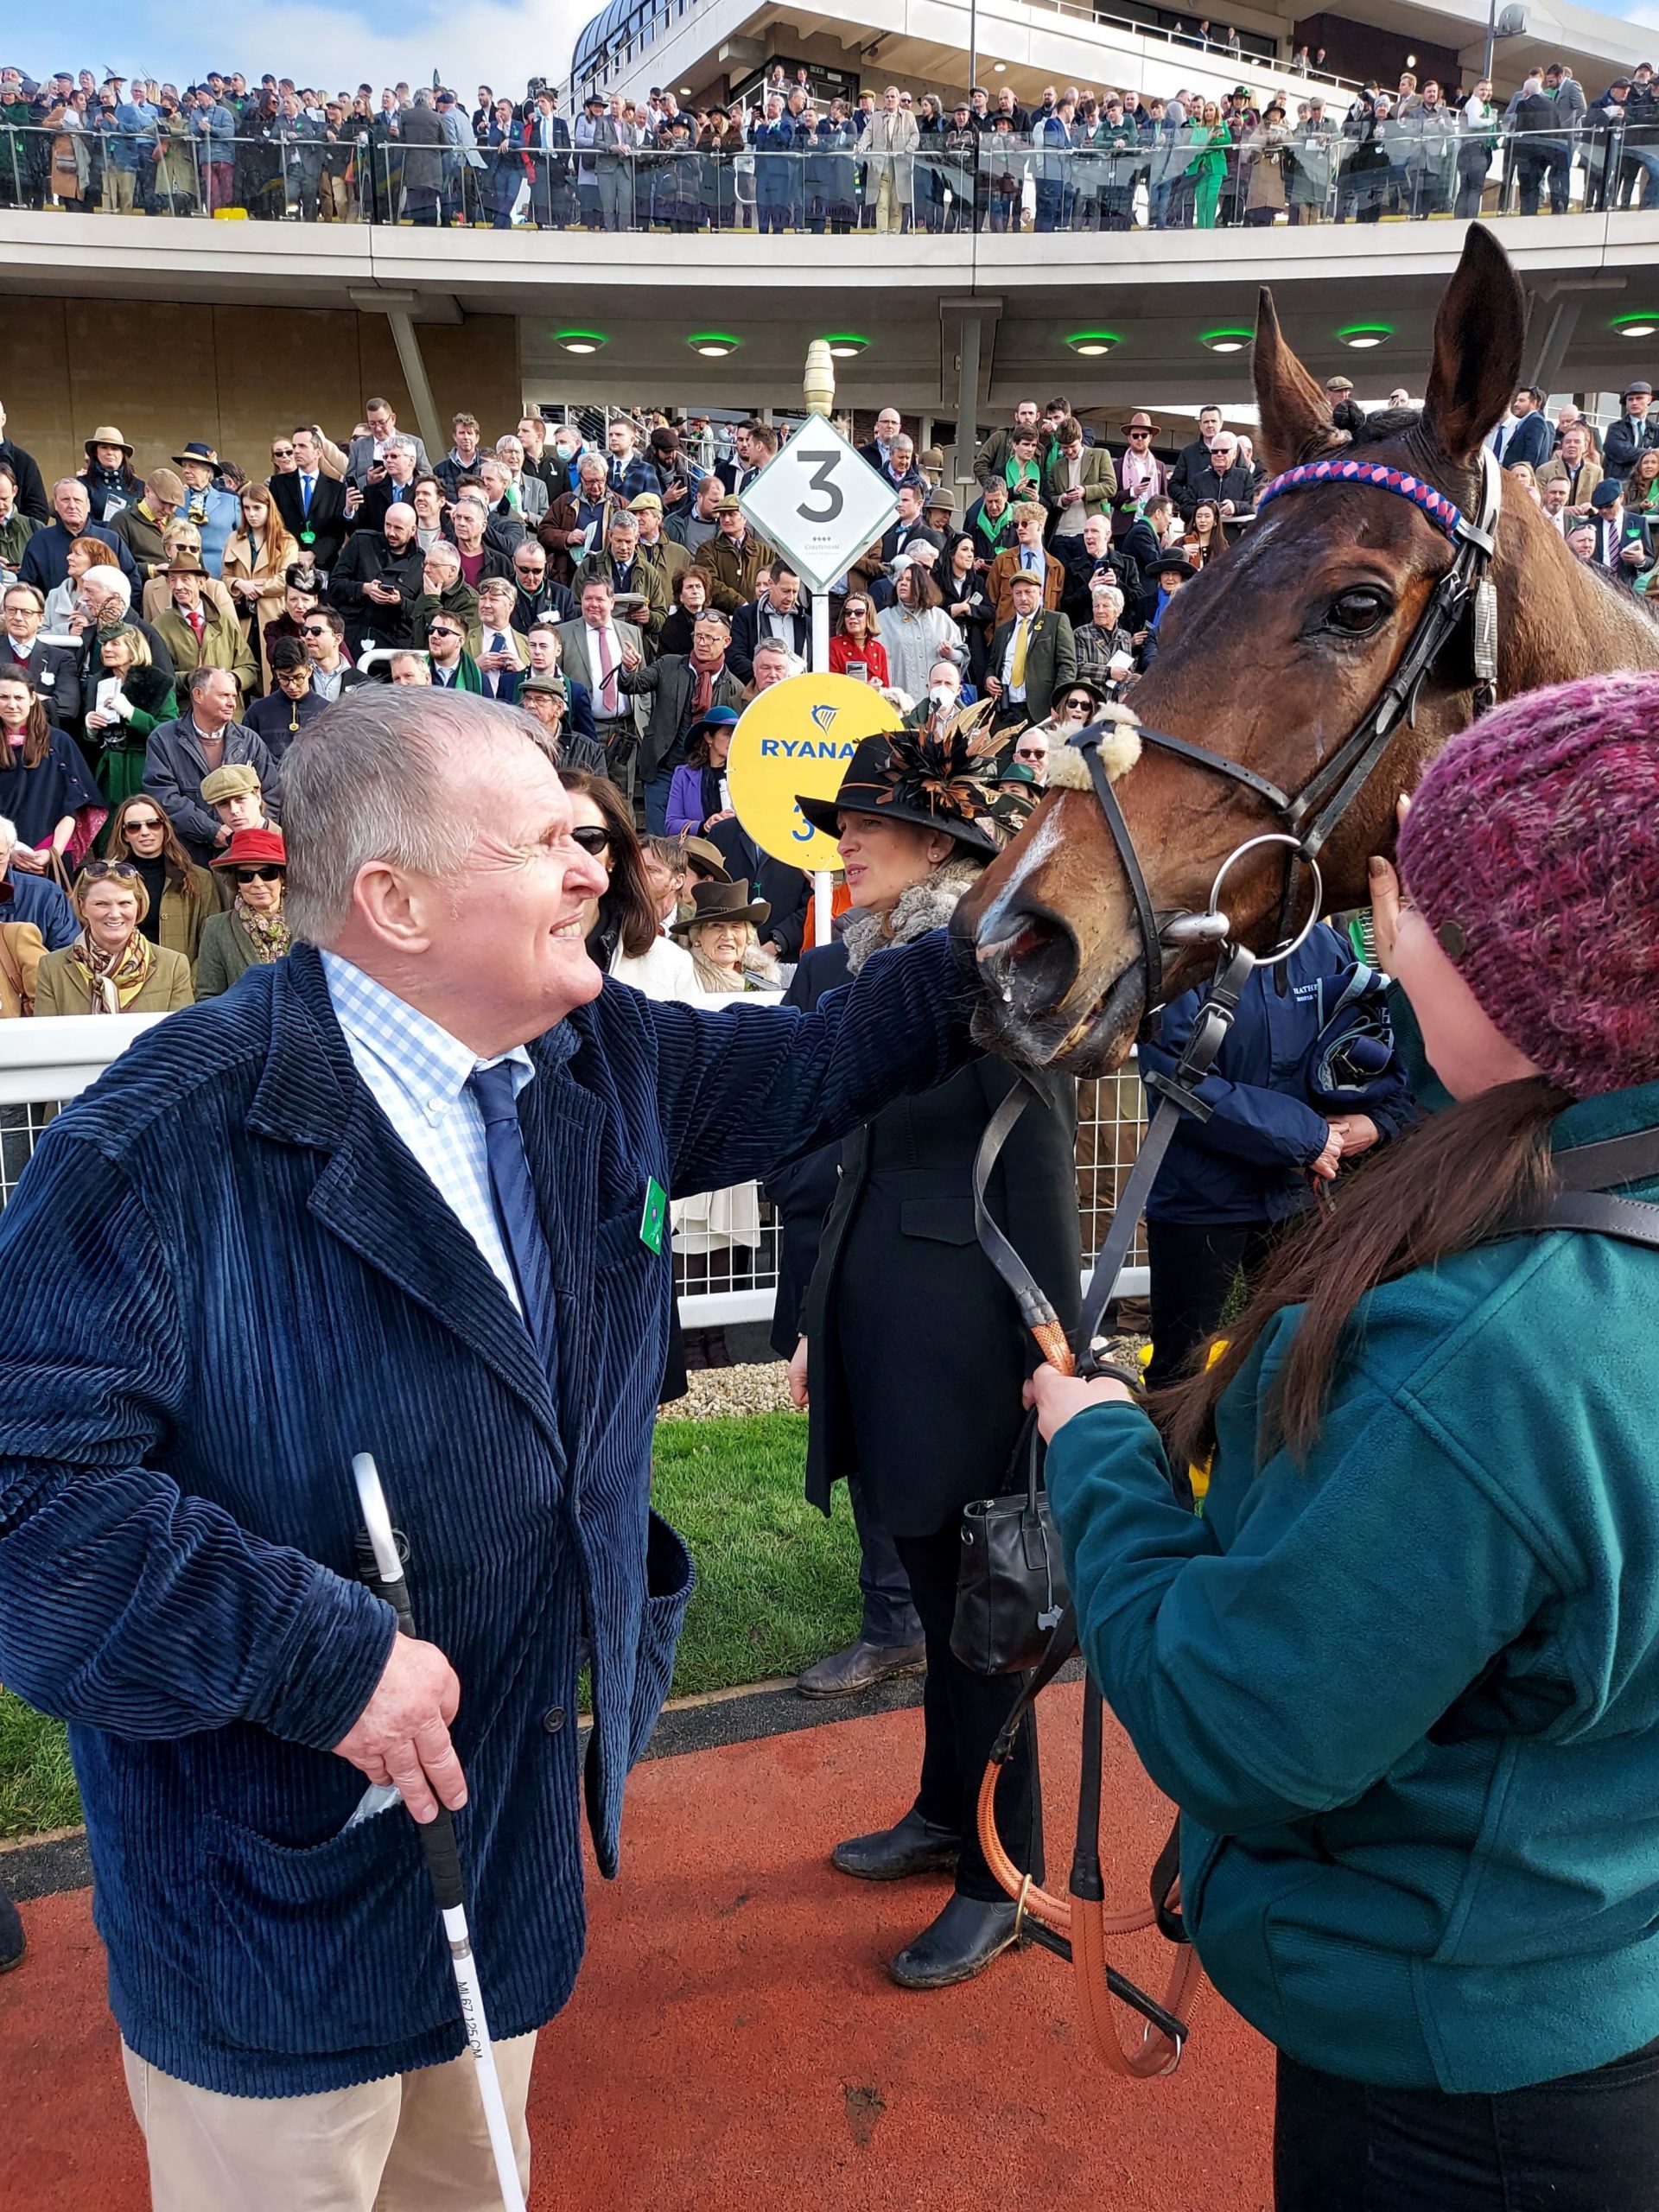 Andrew Gemmell and racehorse, Paisley Park, at Cheltenham Races. Andrew is looking at the horse, stroking his face and holding his cane in the other hand. A groom is holding the horse by the bridle and crowds of people are in the background.